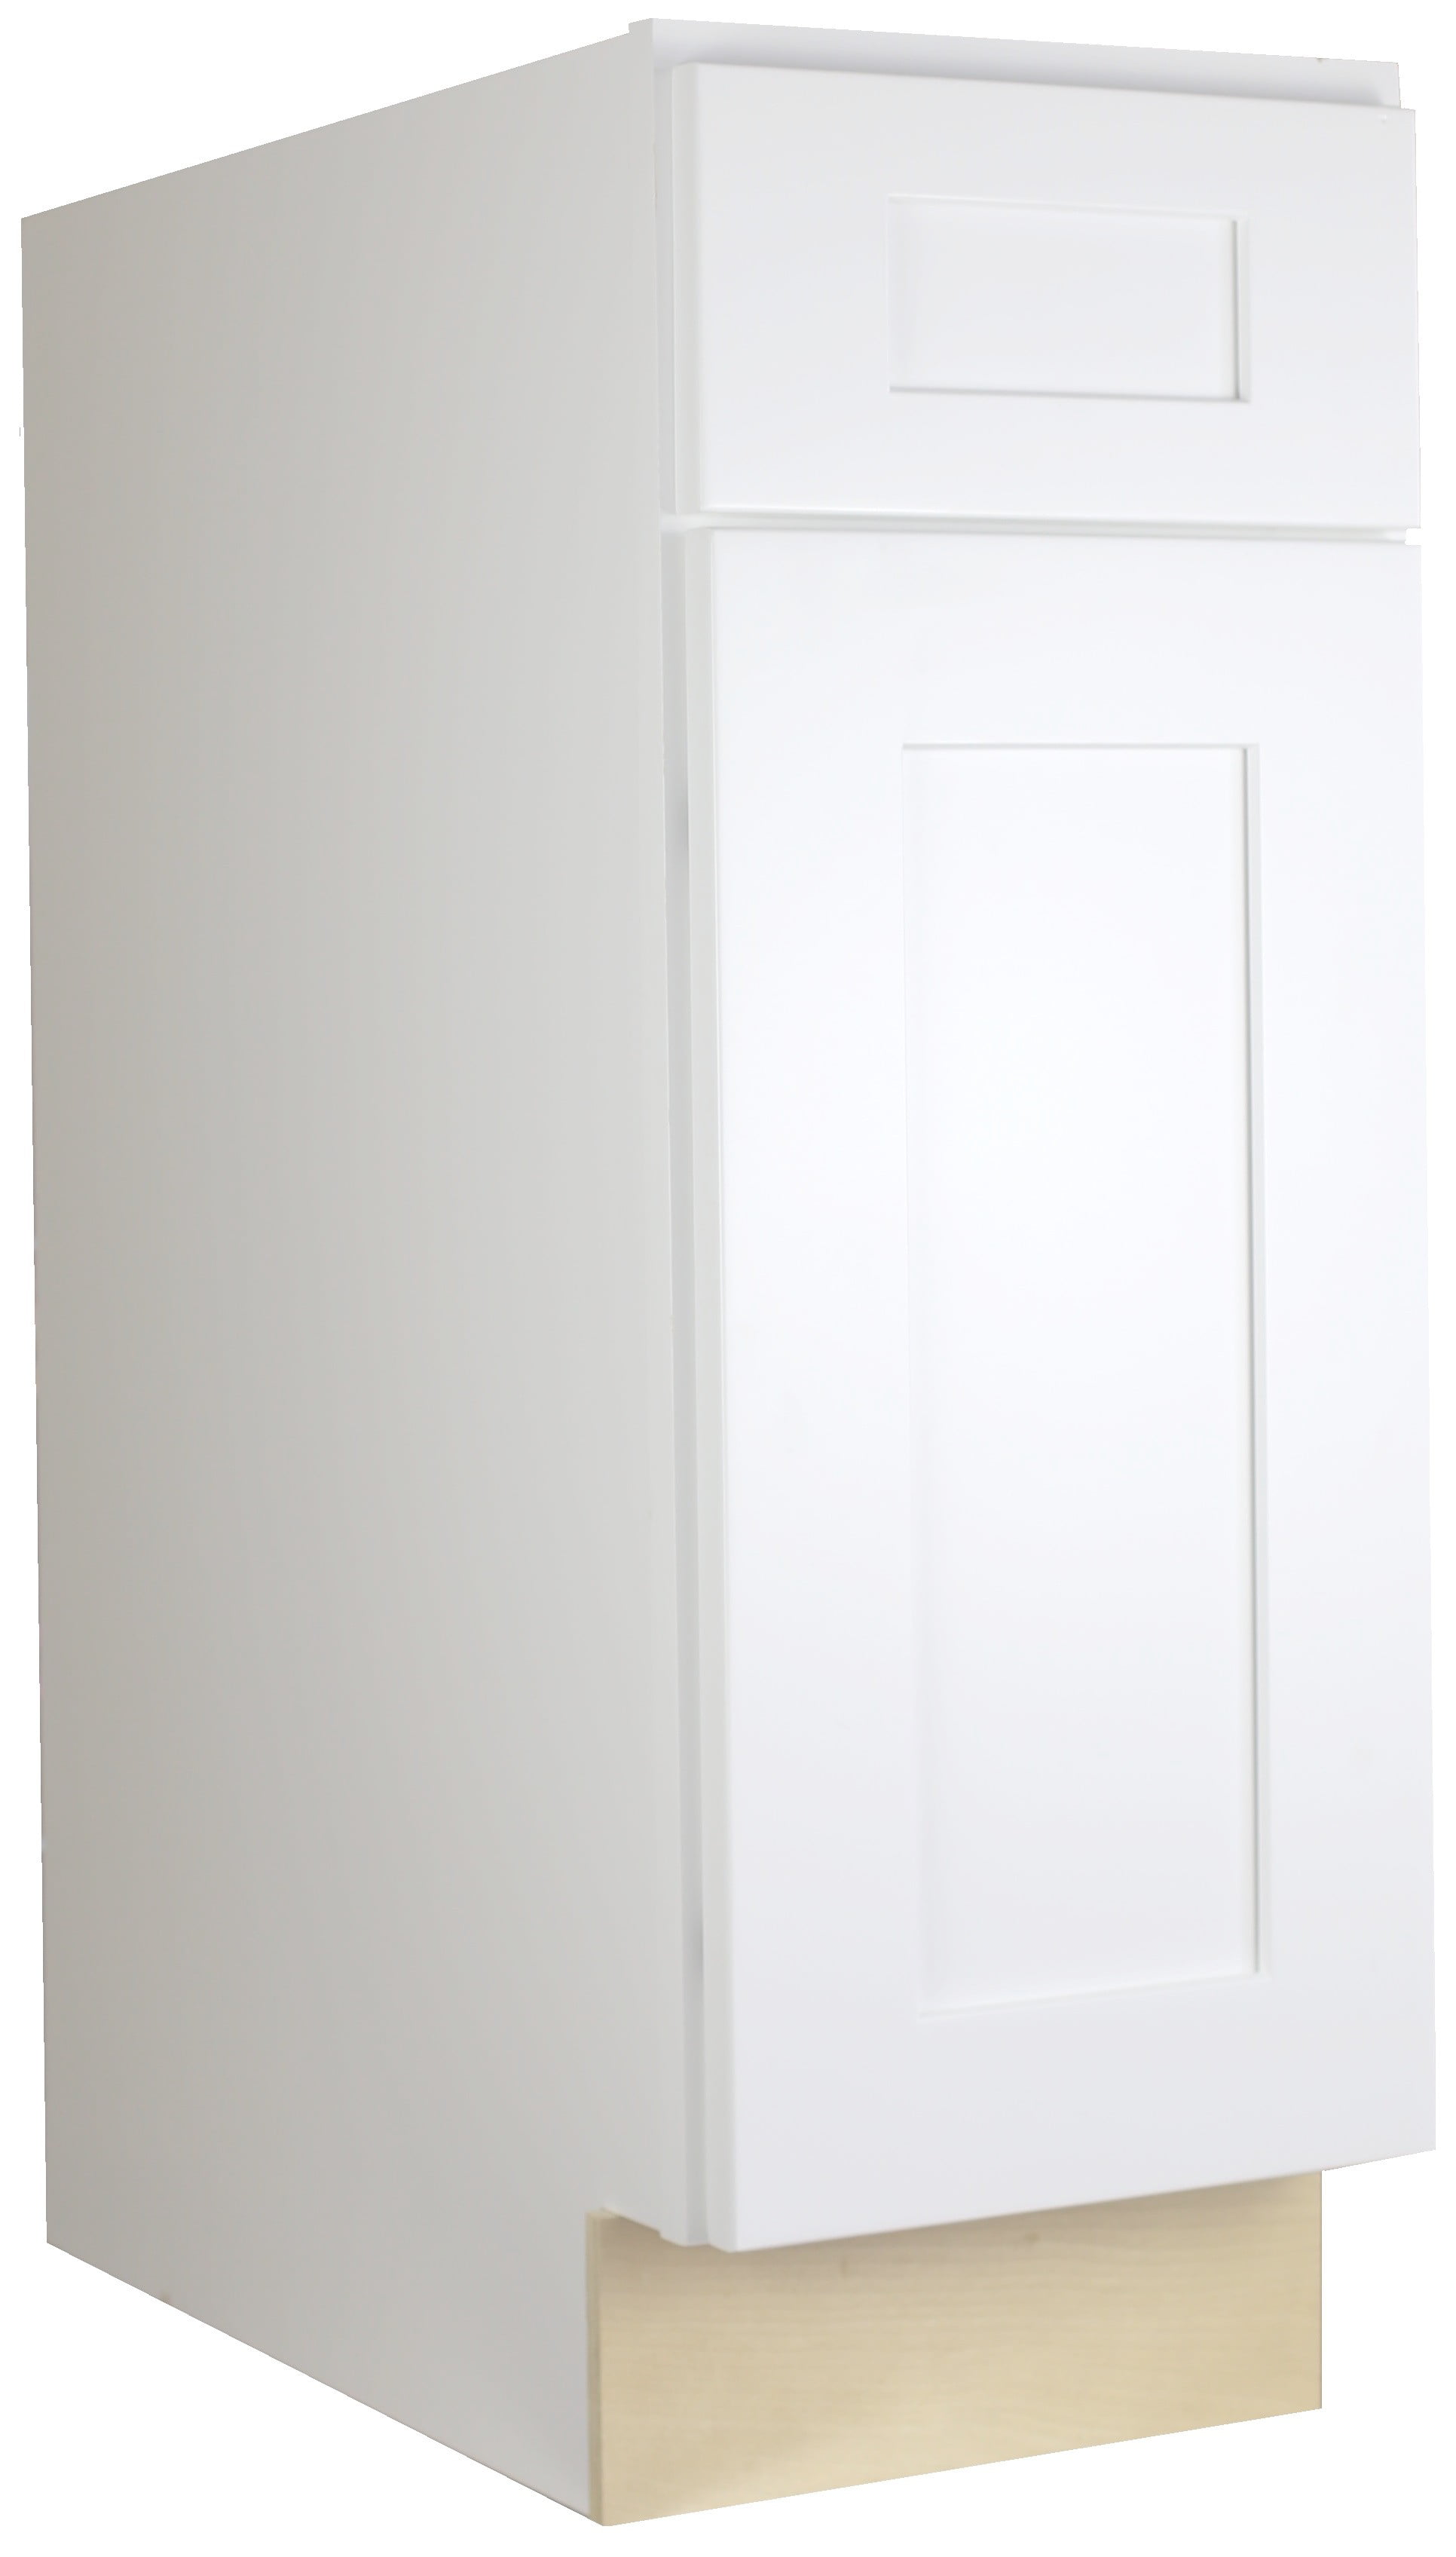 Cabinet Mania White Shaker B21, Bathroom Storage Cabinet 21 Inches Wide